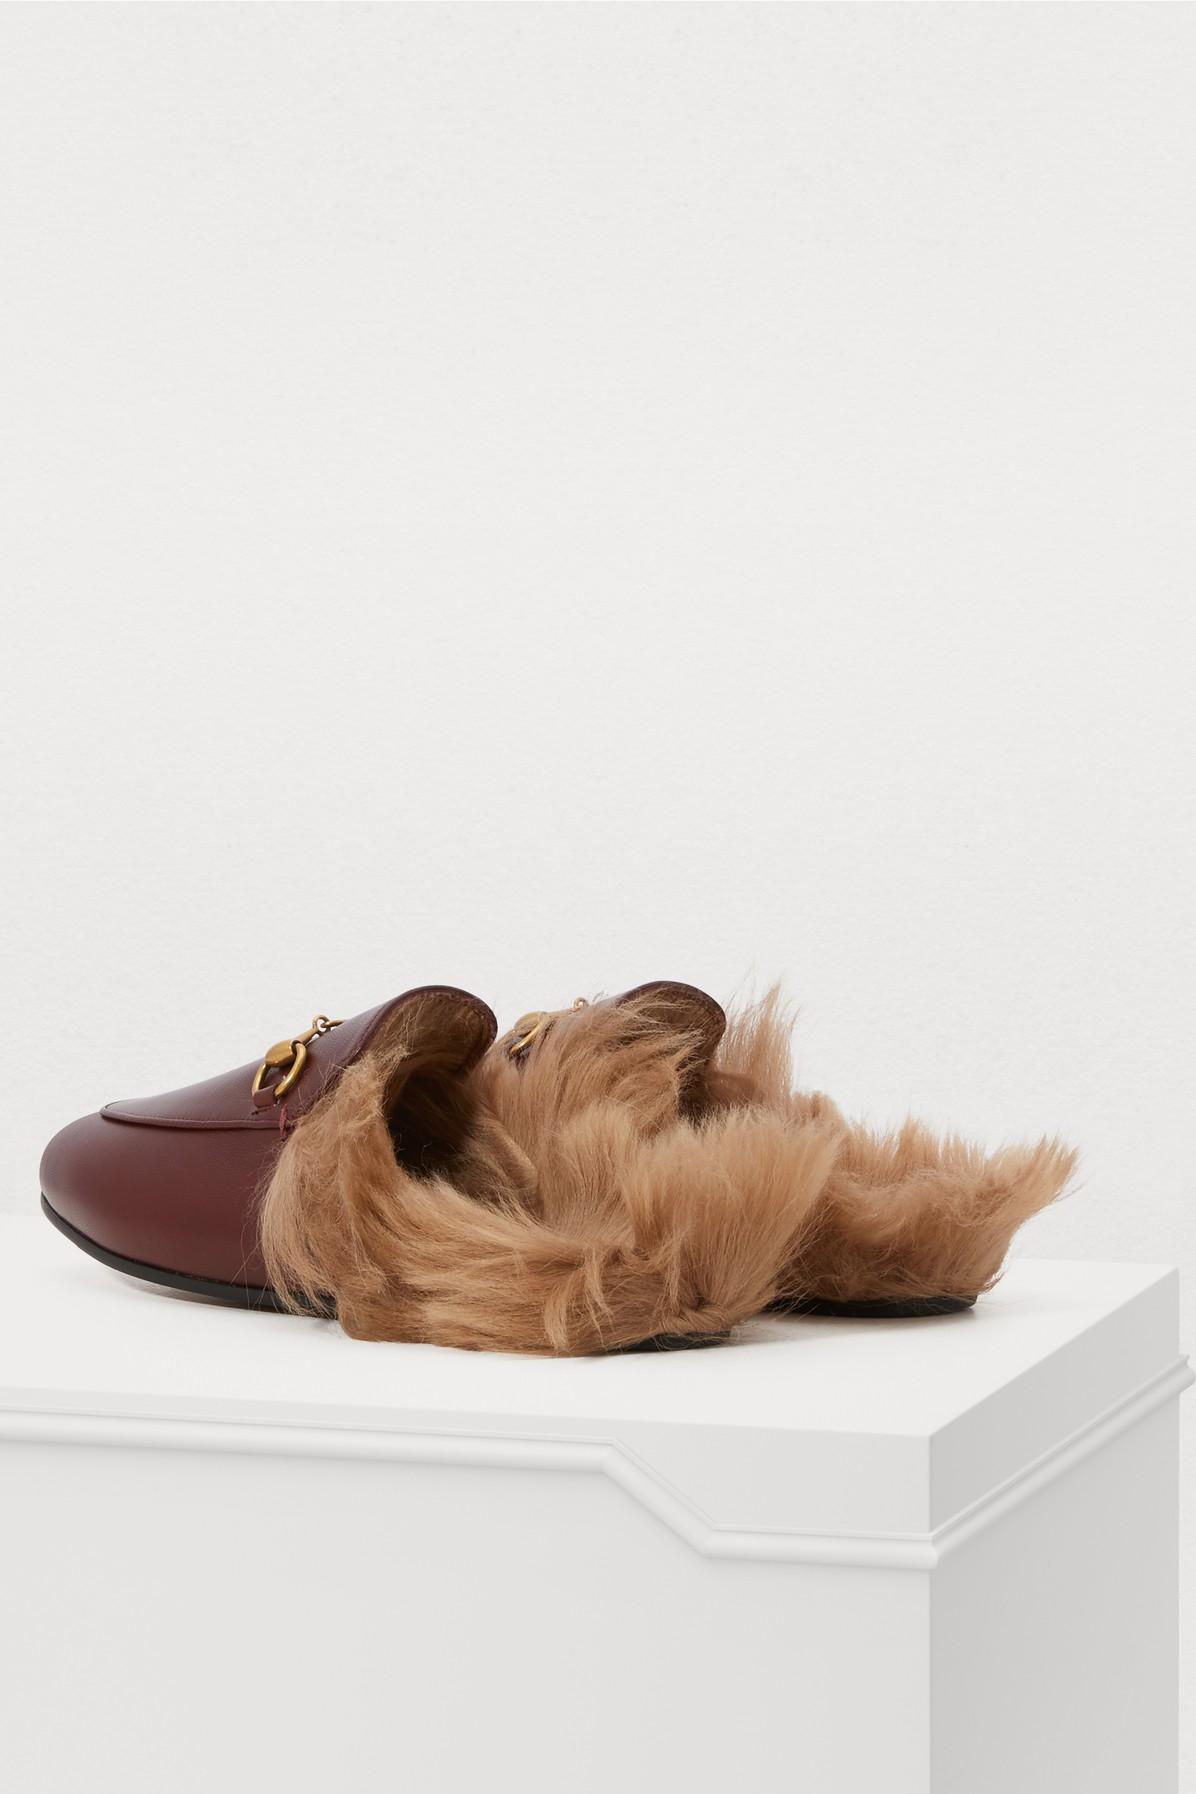 Gucci Princetown Fur Loafers in Bordeaux (Brown) - Lyst